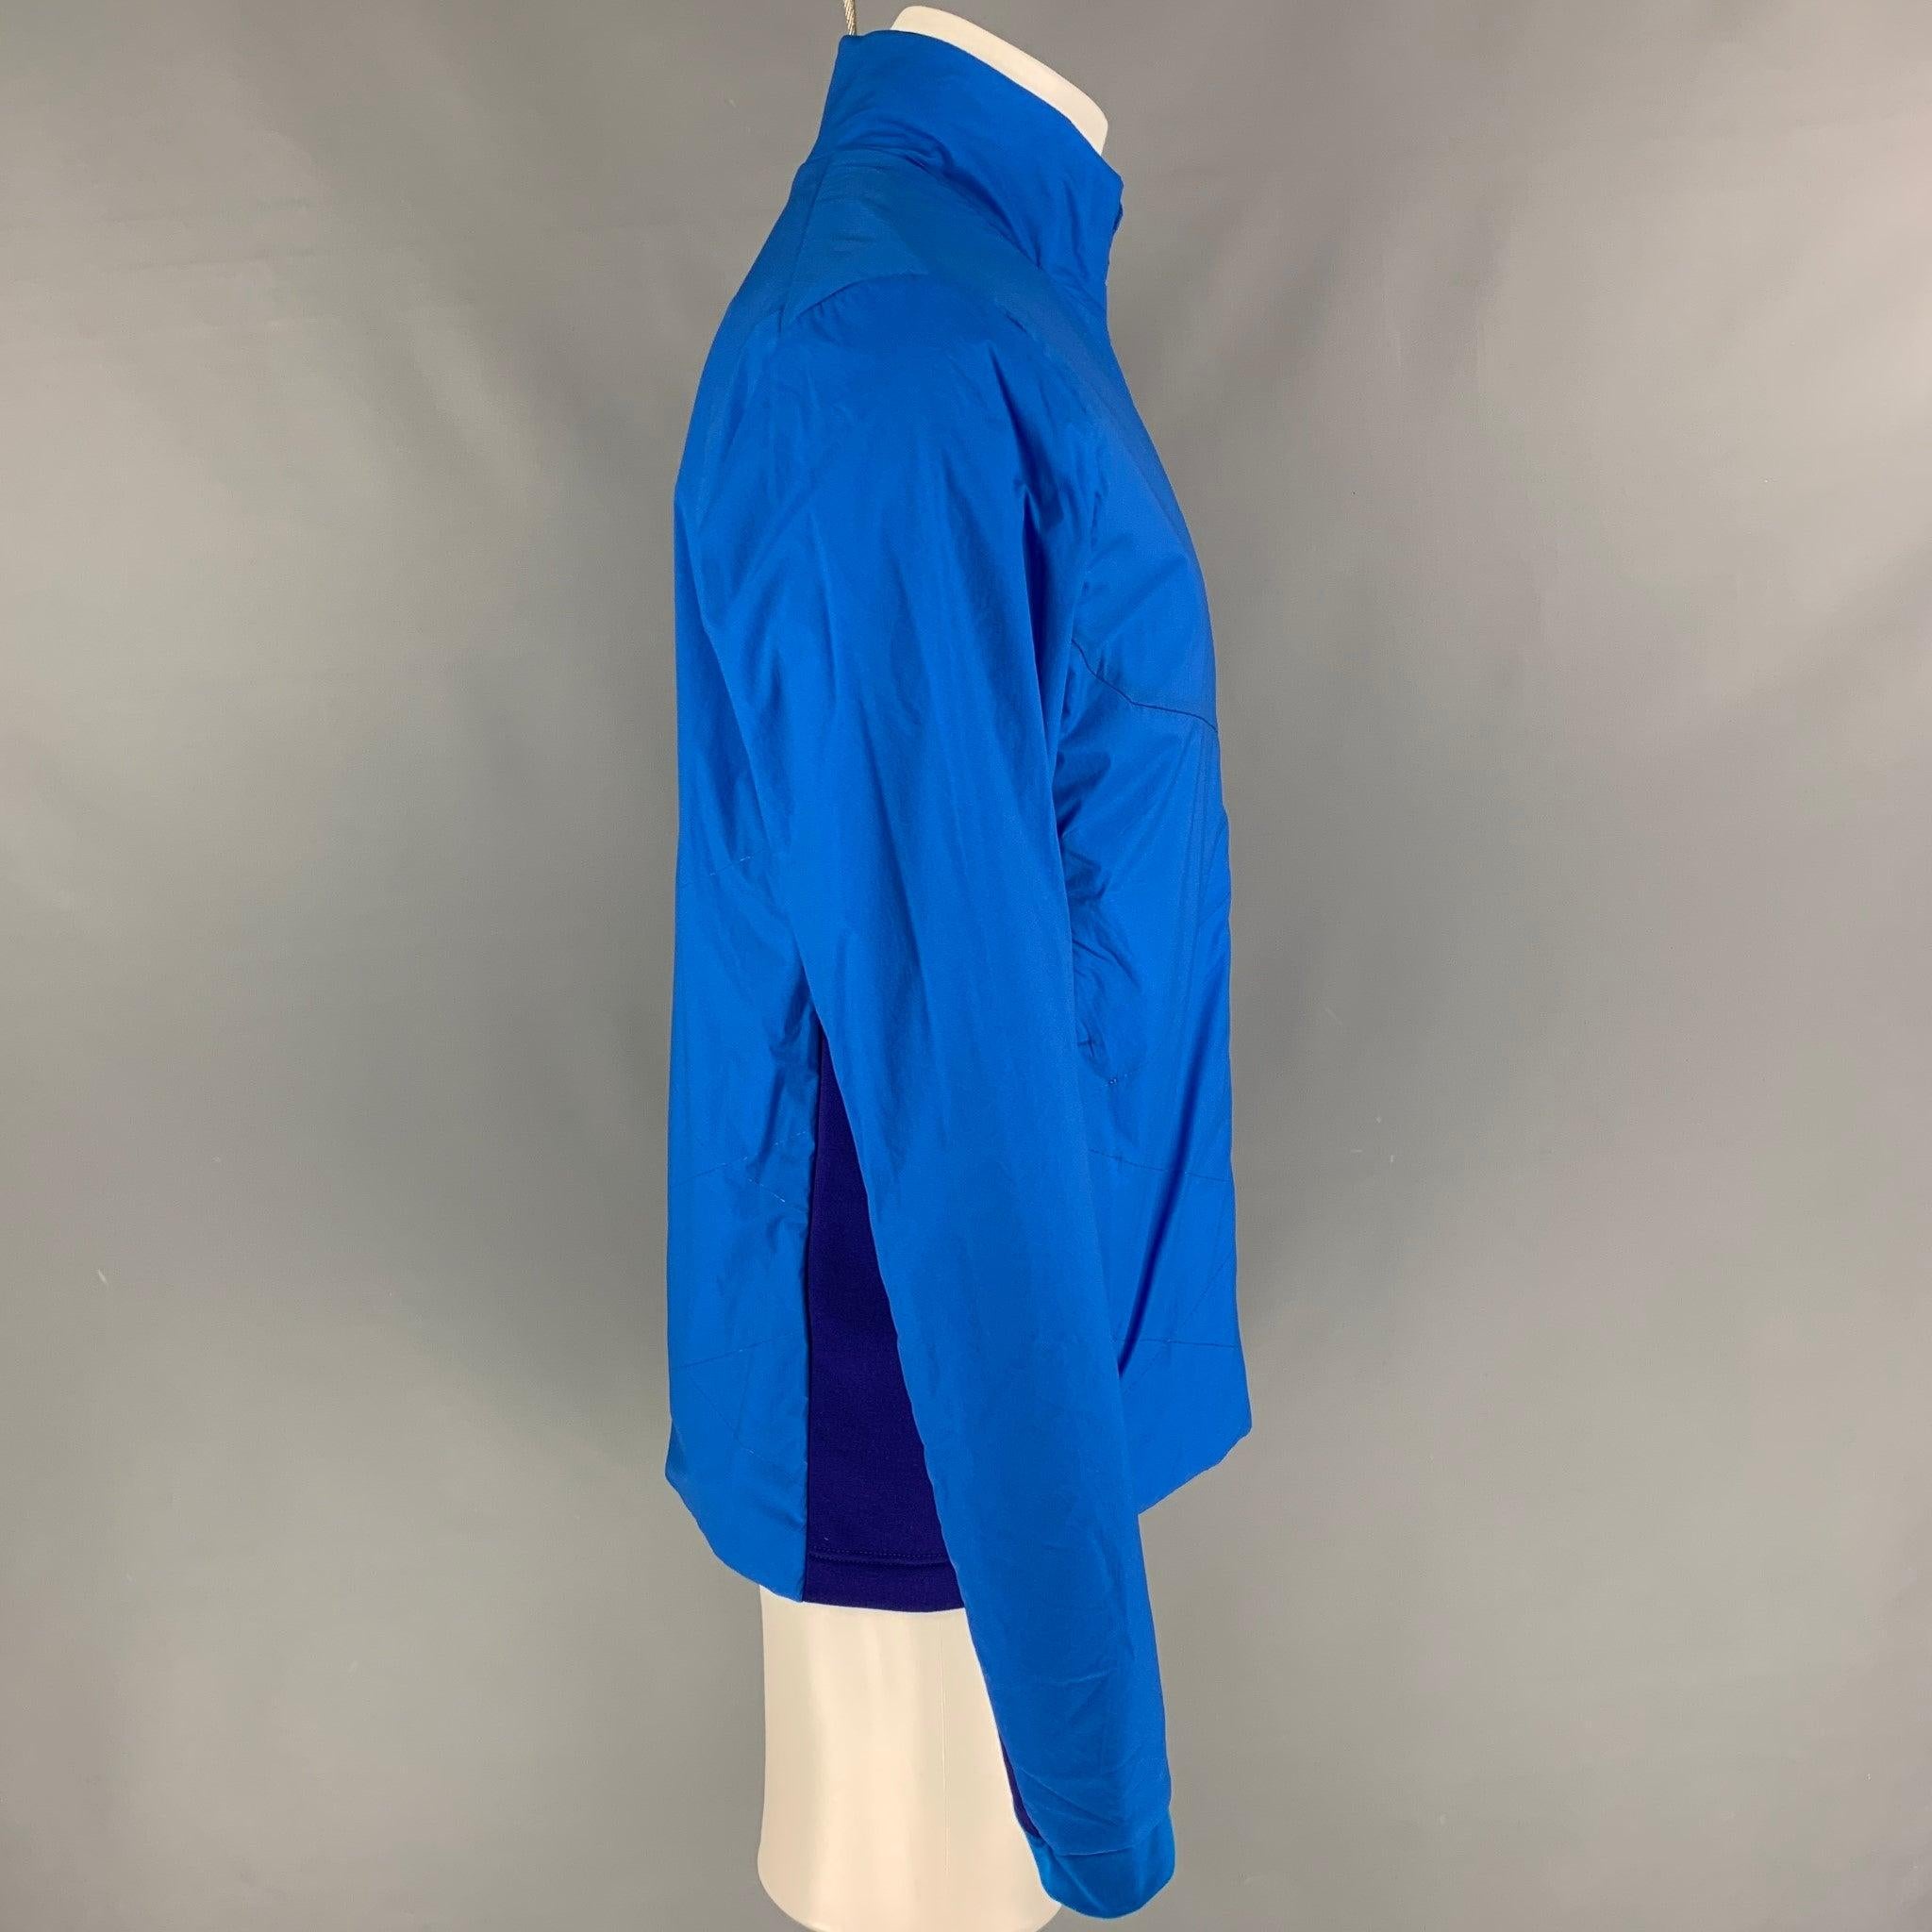 KJUS jacket comes in a royal blue & purple two toned nylon blend featuring a high collar, slit pockets, and a zip up closure.
New With Tags.
 

Marked:   M  

Measurements: 
 
Shoulder: 19 inches  Chest: 42 inches  Sleeve: 28 inches  Length: 29